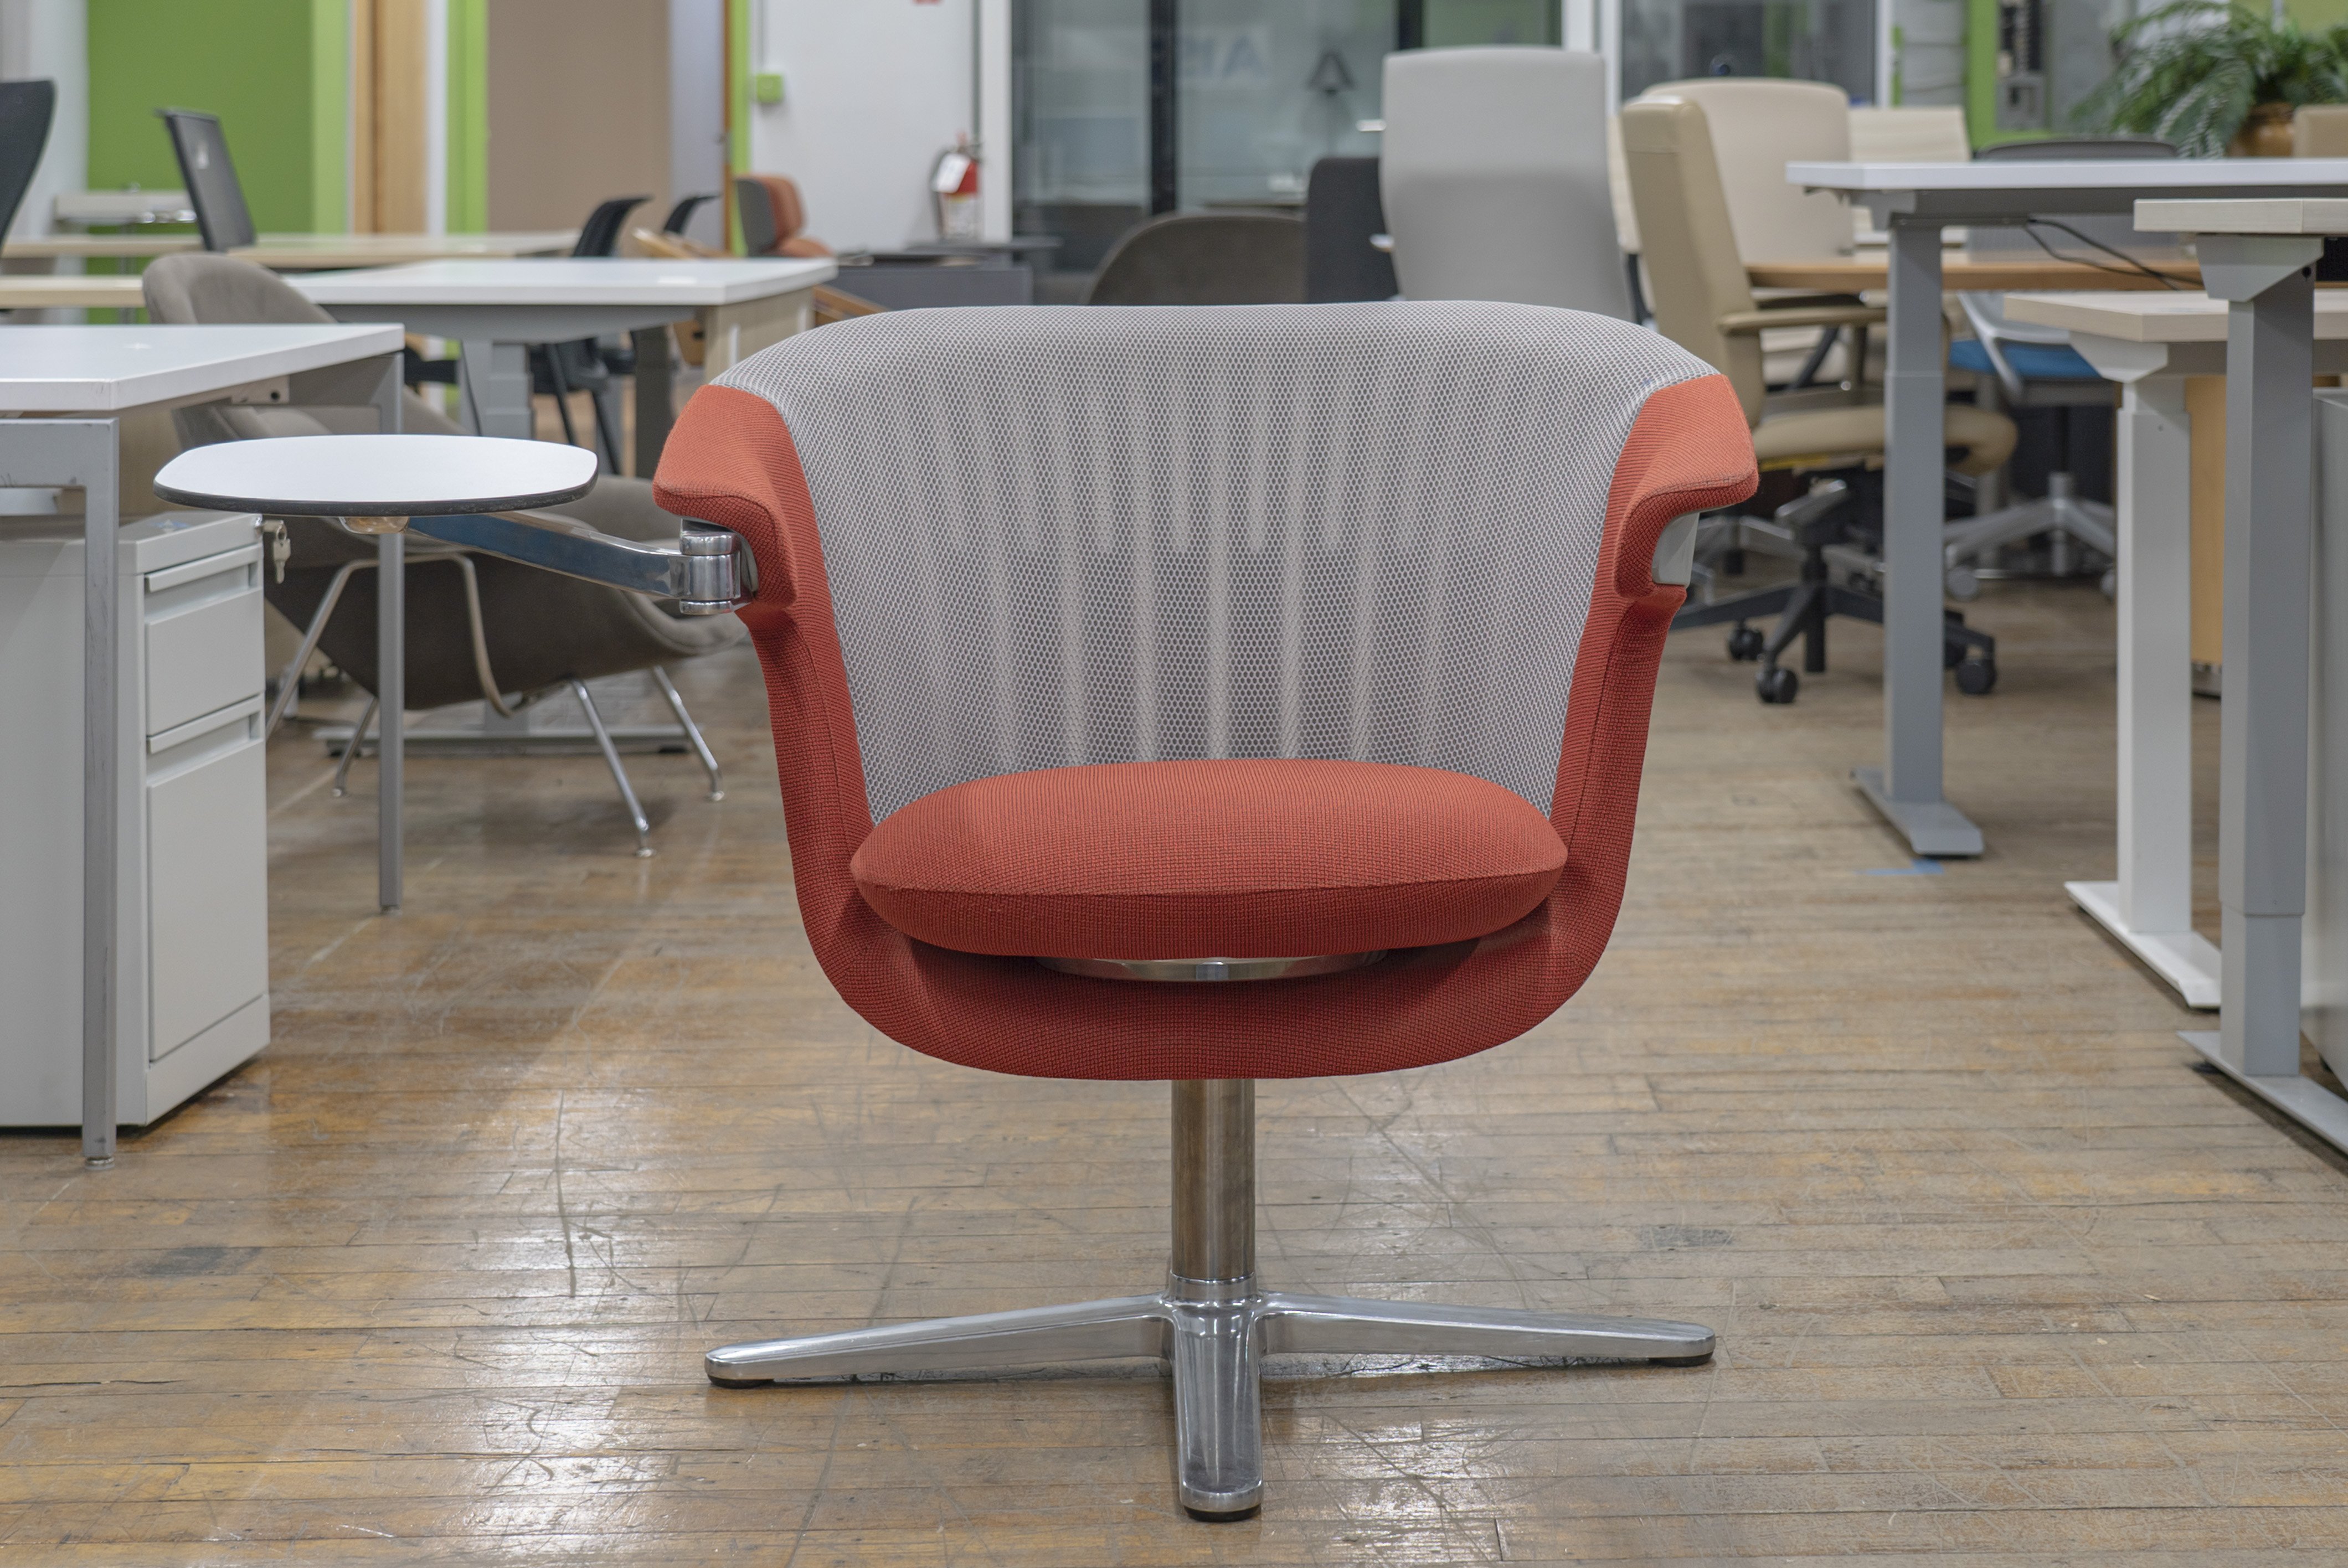 steelcase-i2i-swivel-lounge-chairs-with-tablet-copy